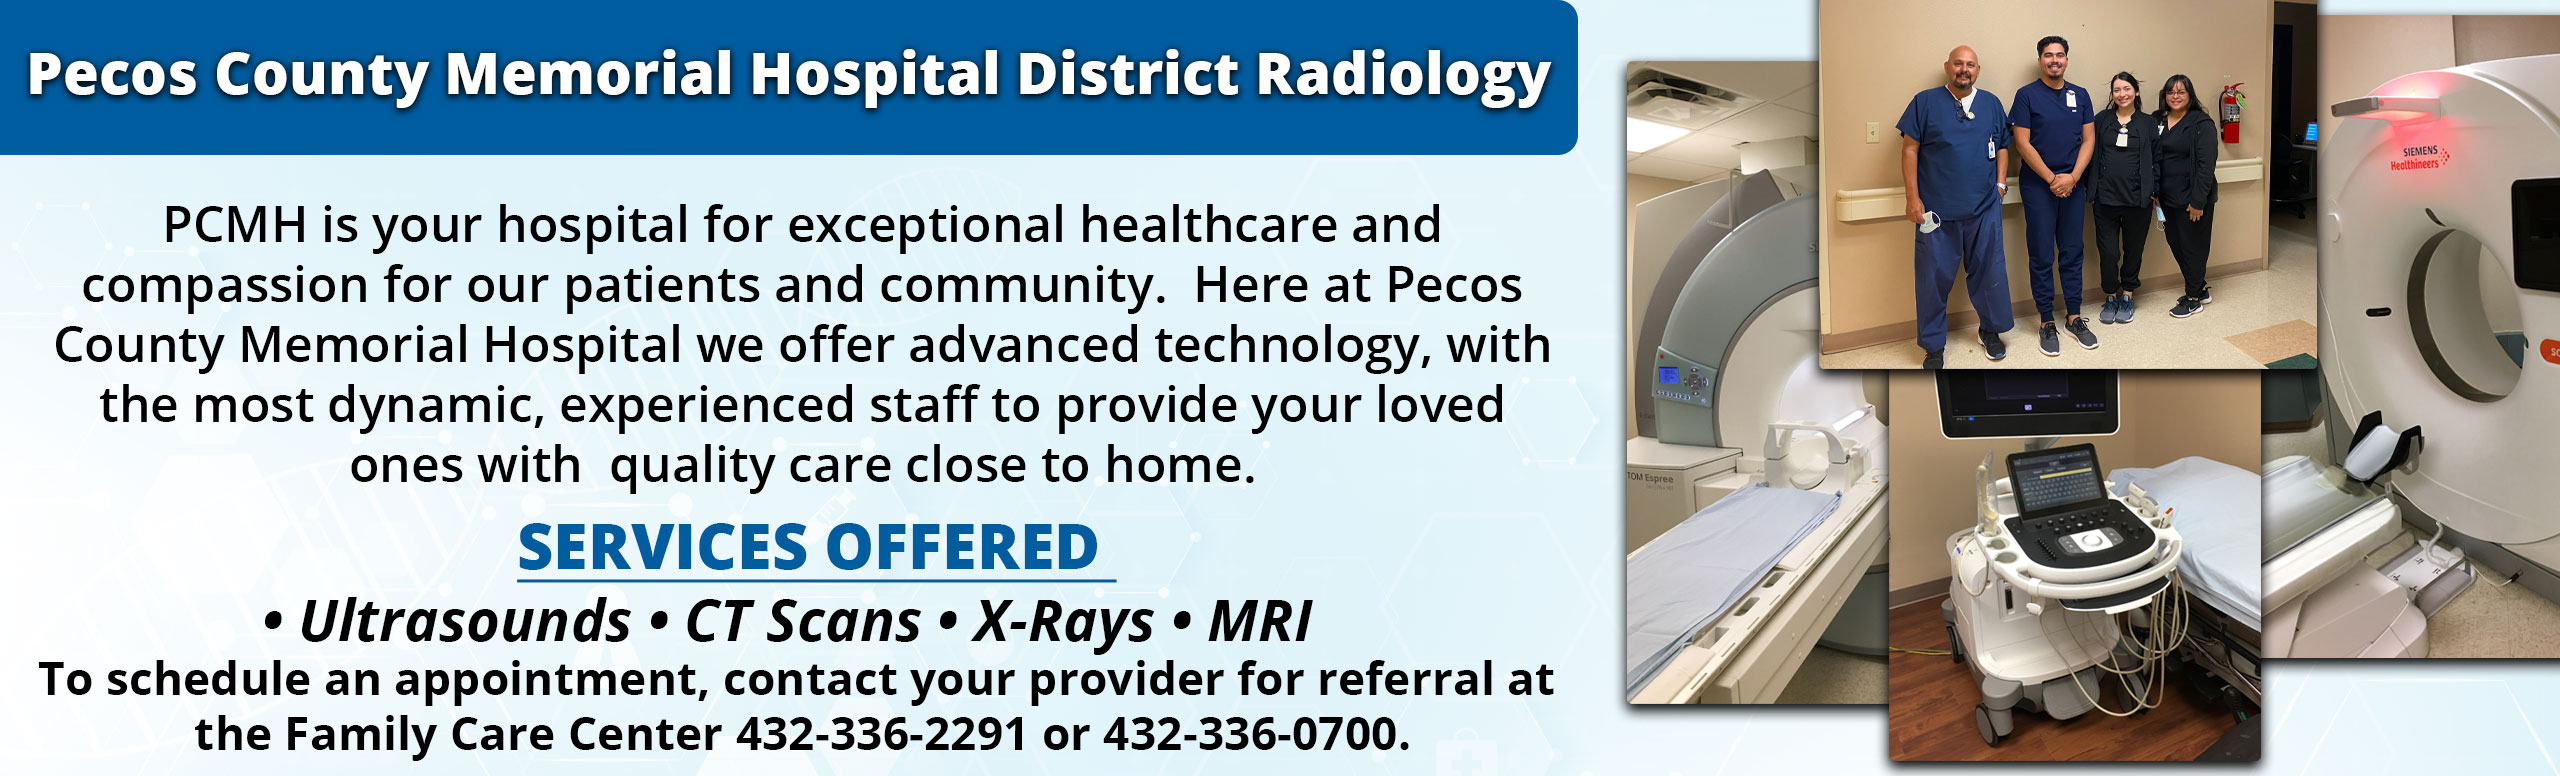 Banner picture of New MRI and CT machines. Banner says:

Pecos County Memorial Hospital Radiology

PCMH is your hospital for exceptional healthcare and compassion for our patients and community.  Here at Pecos County Memorial Hospital we offer advanced technology, with the most dynamic, experienced staff to provide your loved ones with  quality care close to home.

Services Offered 
• Ultrasounds • CT Scans • X-Rays • MRI 

To schedule an appointment, contact your provider for referral at 
the Family Care Center 432-336-2291 or 432-336-0700.